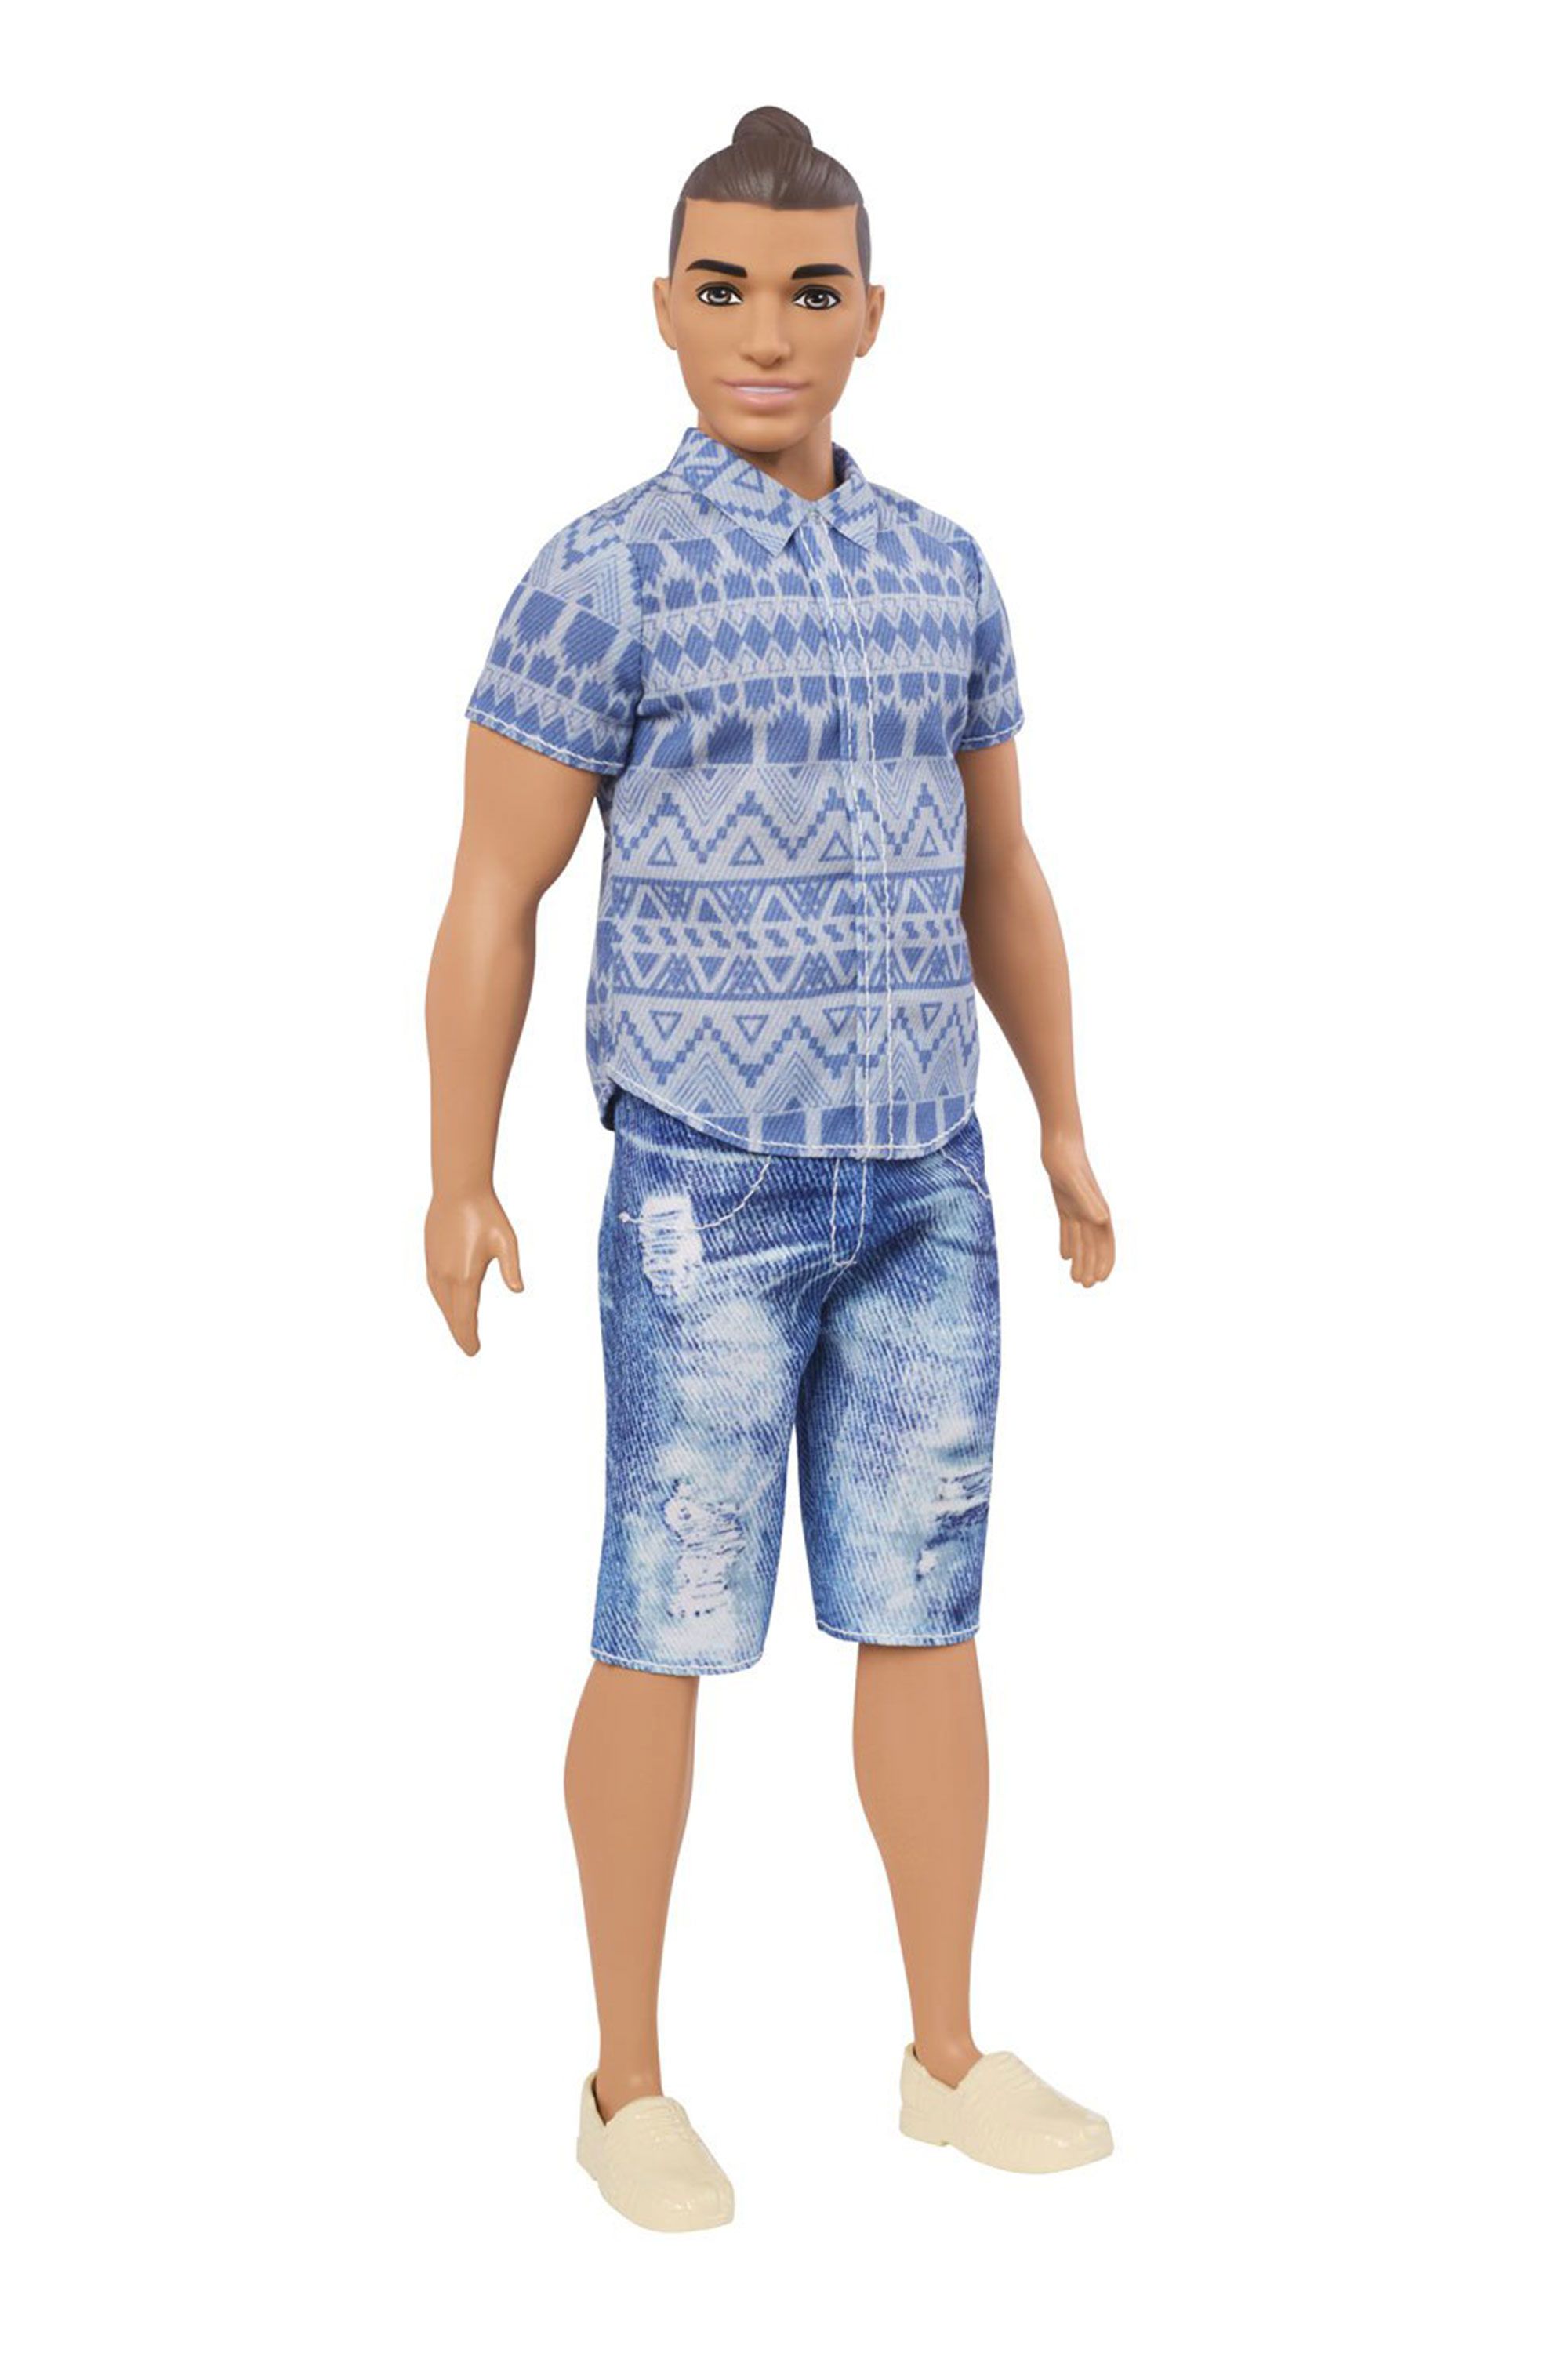 New Plus-size Ken Doll Called 'Broad'